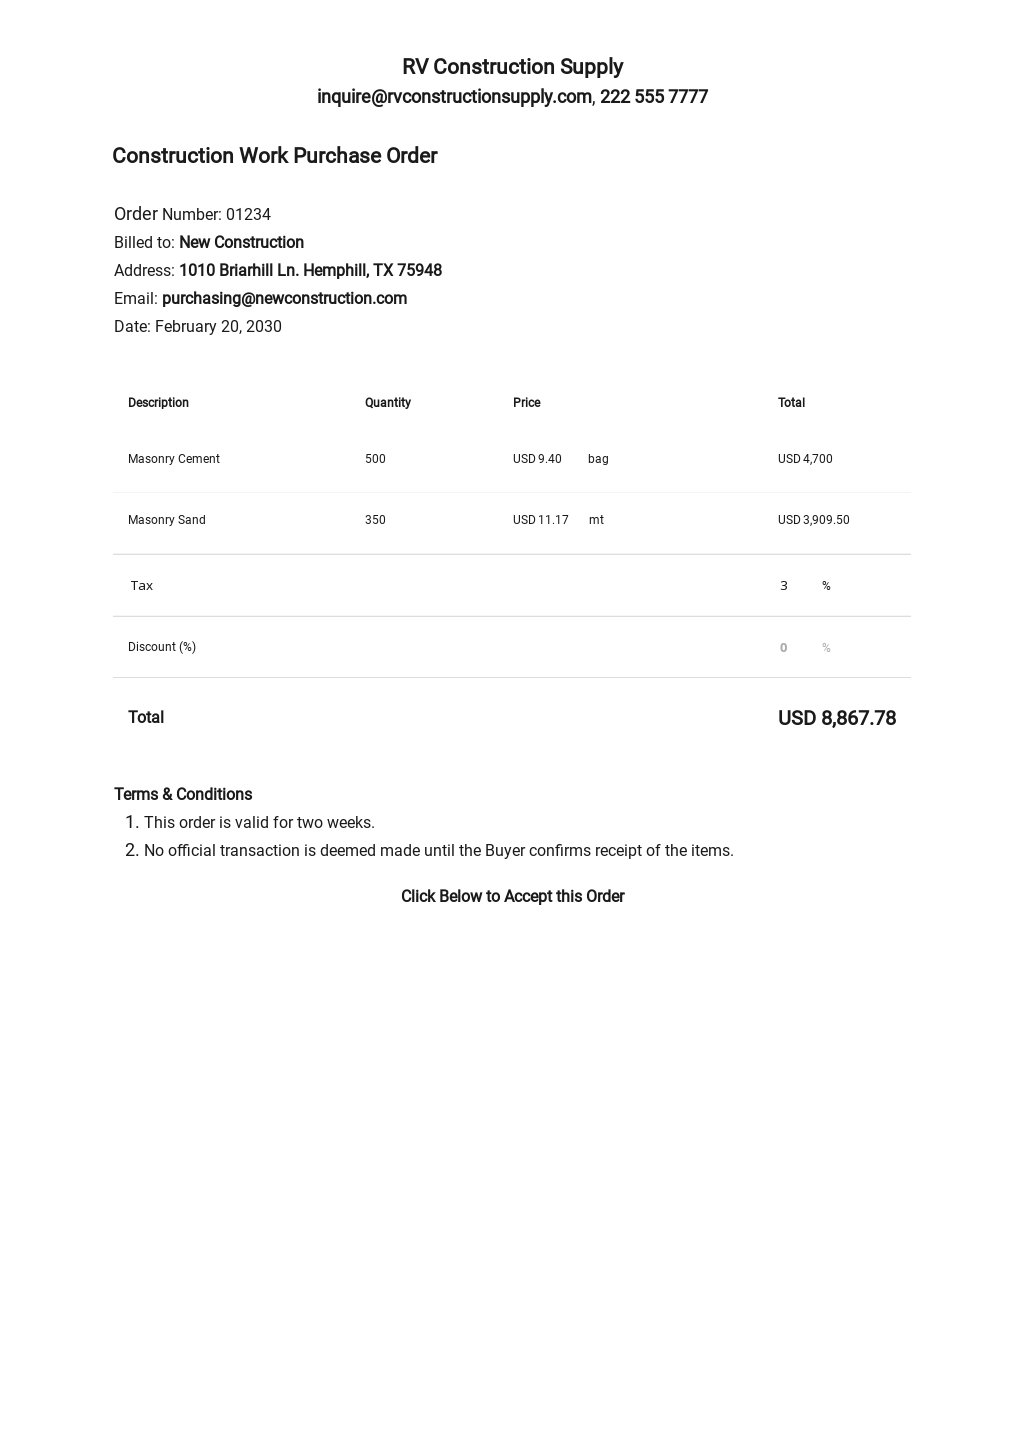 Construction Work Purchase Order Template.jpe